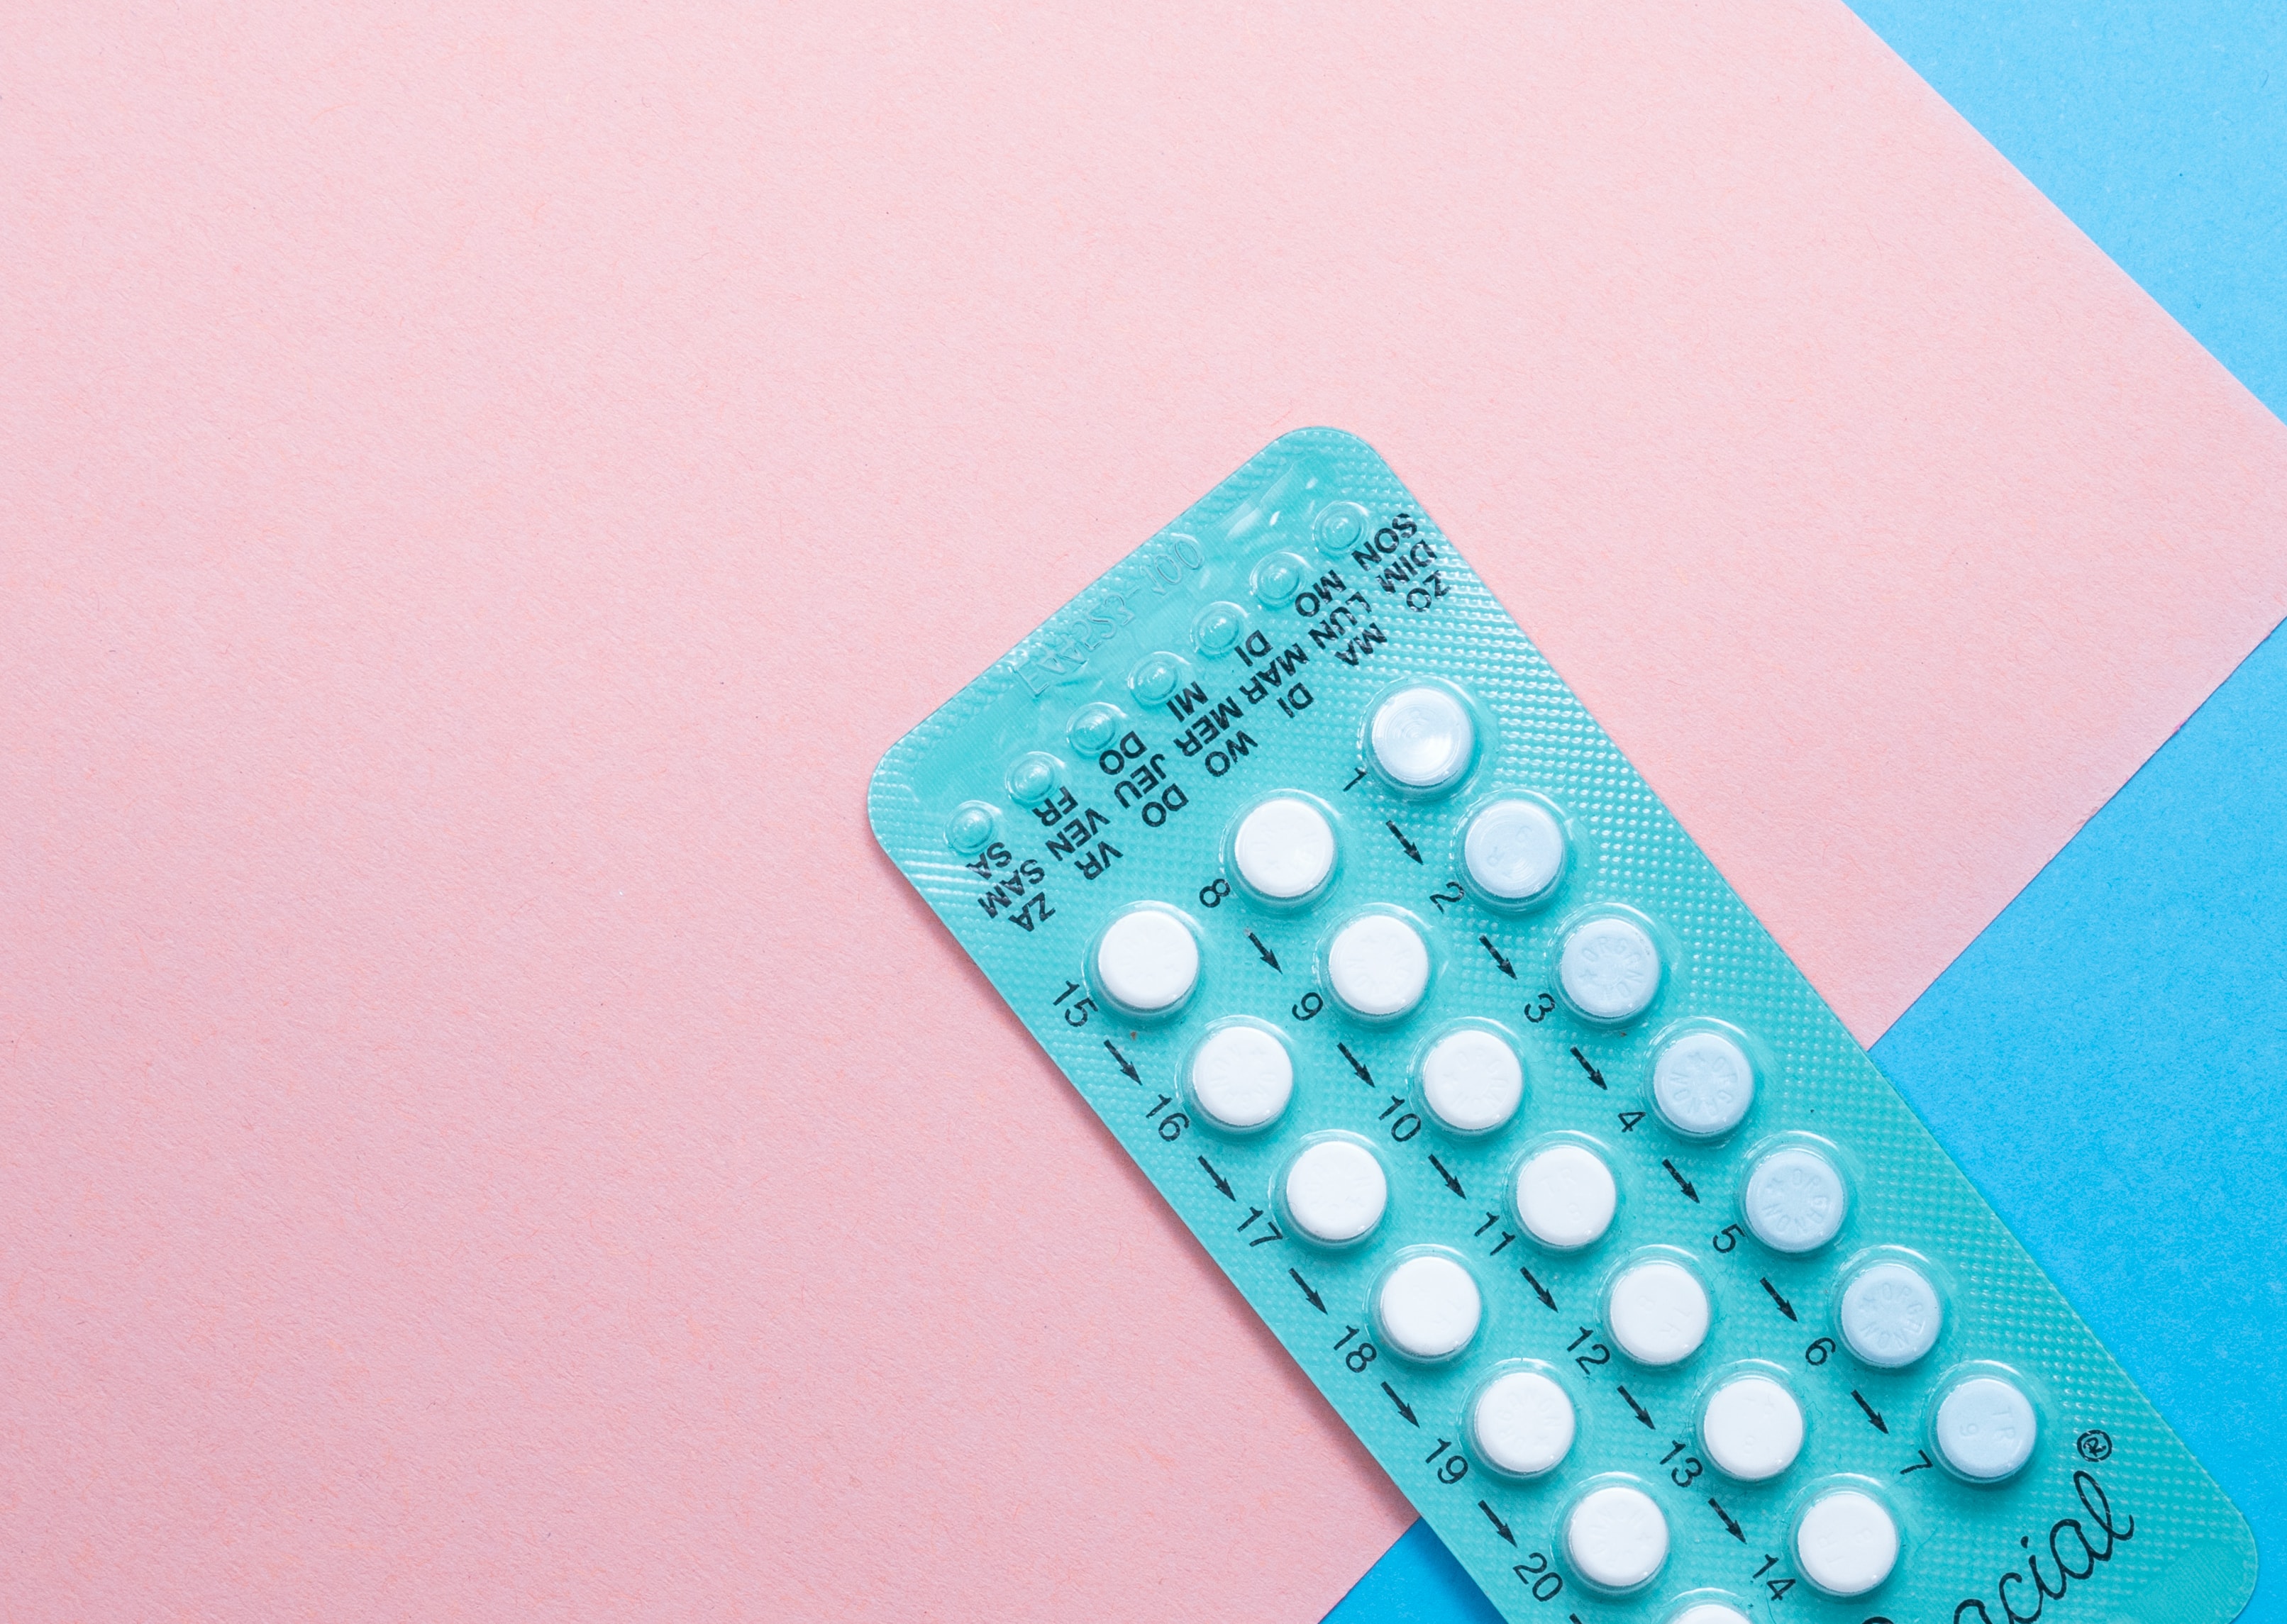 Catholic teaching birth control is unpopular. So why is pop culture starting to agree with it? | America Magazine